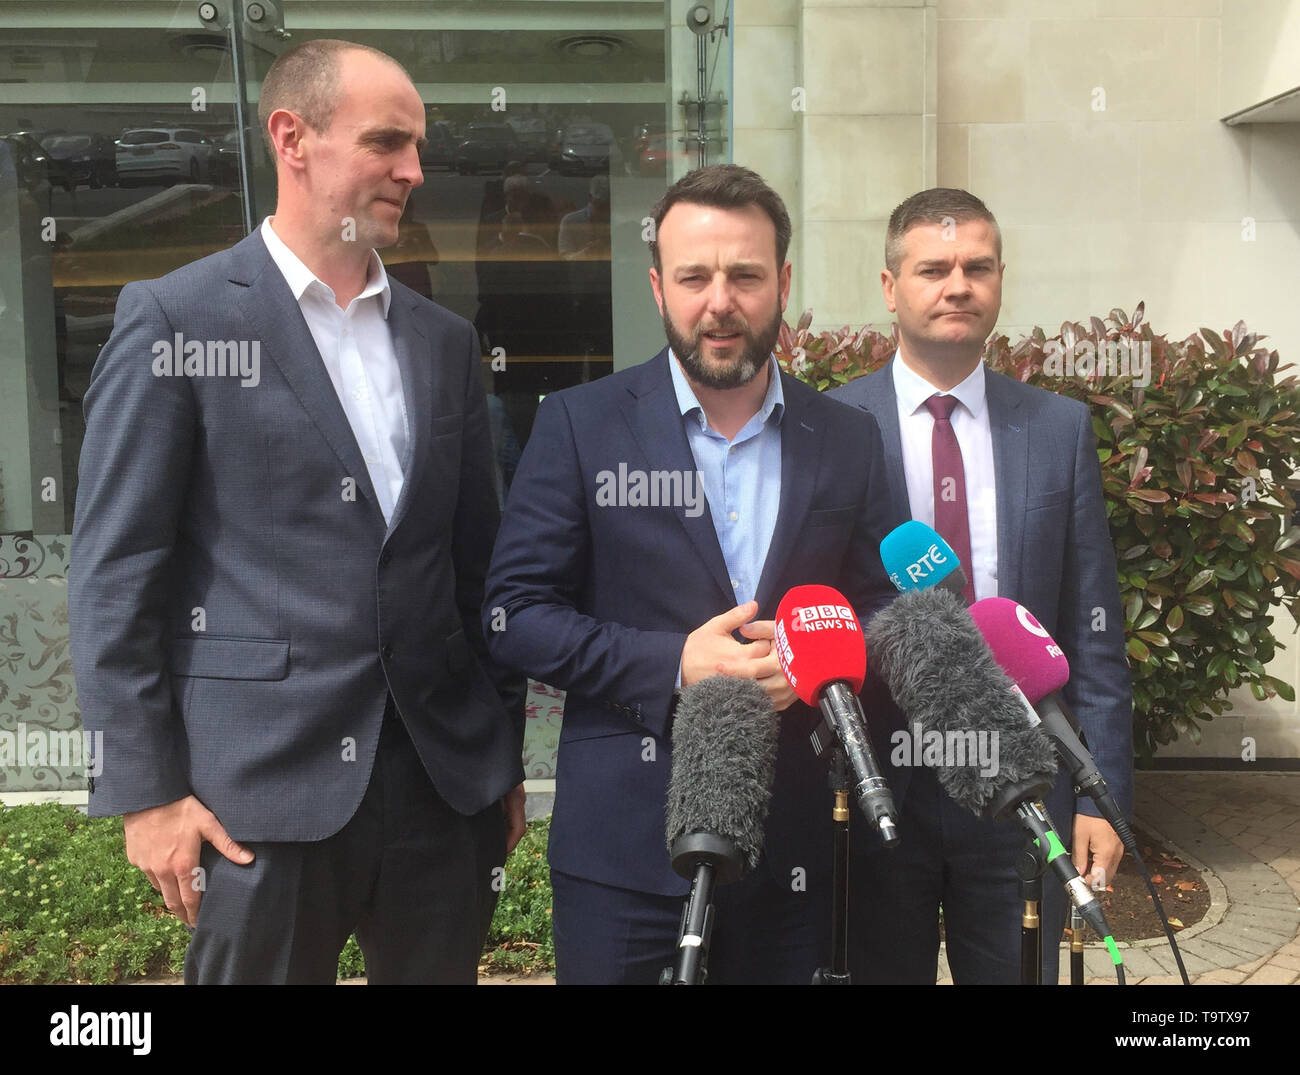 SDLP leader Colum Eastwood (centre) speaks to the media outside Stormont Hotel in Belfast. Political leaders in Northern Ireland have accused the Secretary of State for Northern Ireland Karen Bradley of employing delaying tactics to frustrate compensation payments for abuse victims. Stock Photo